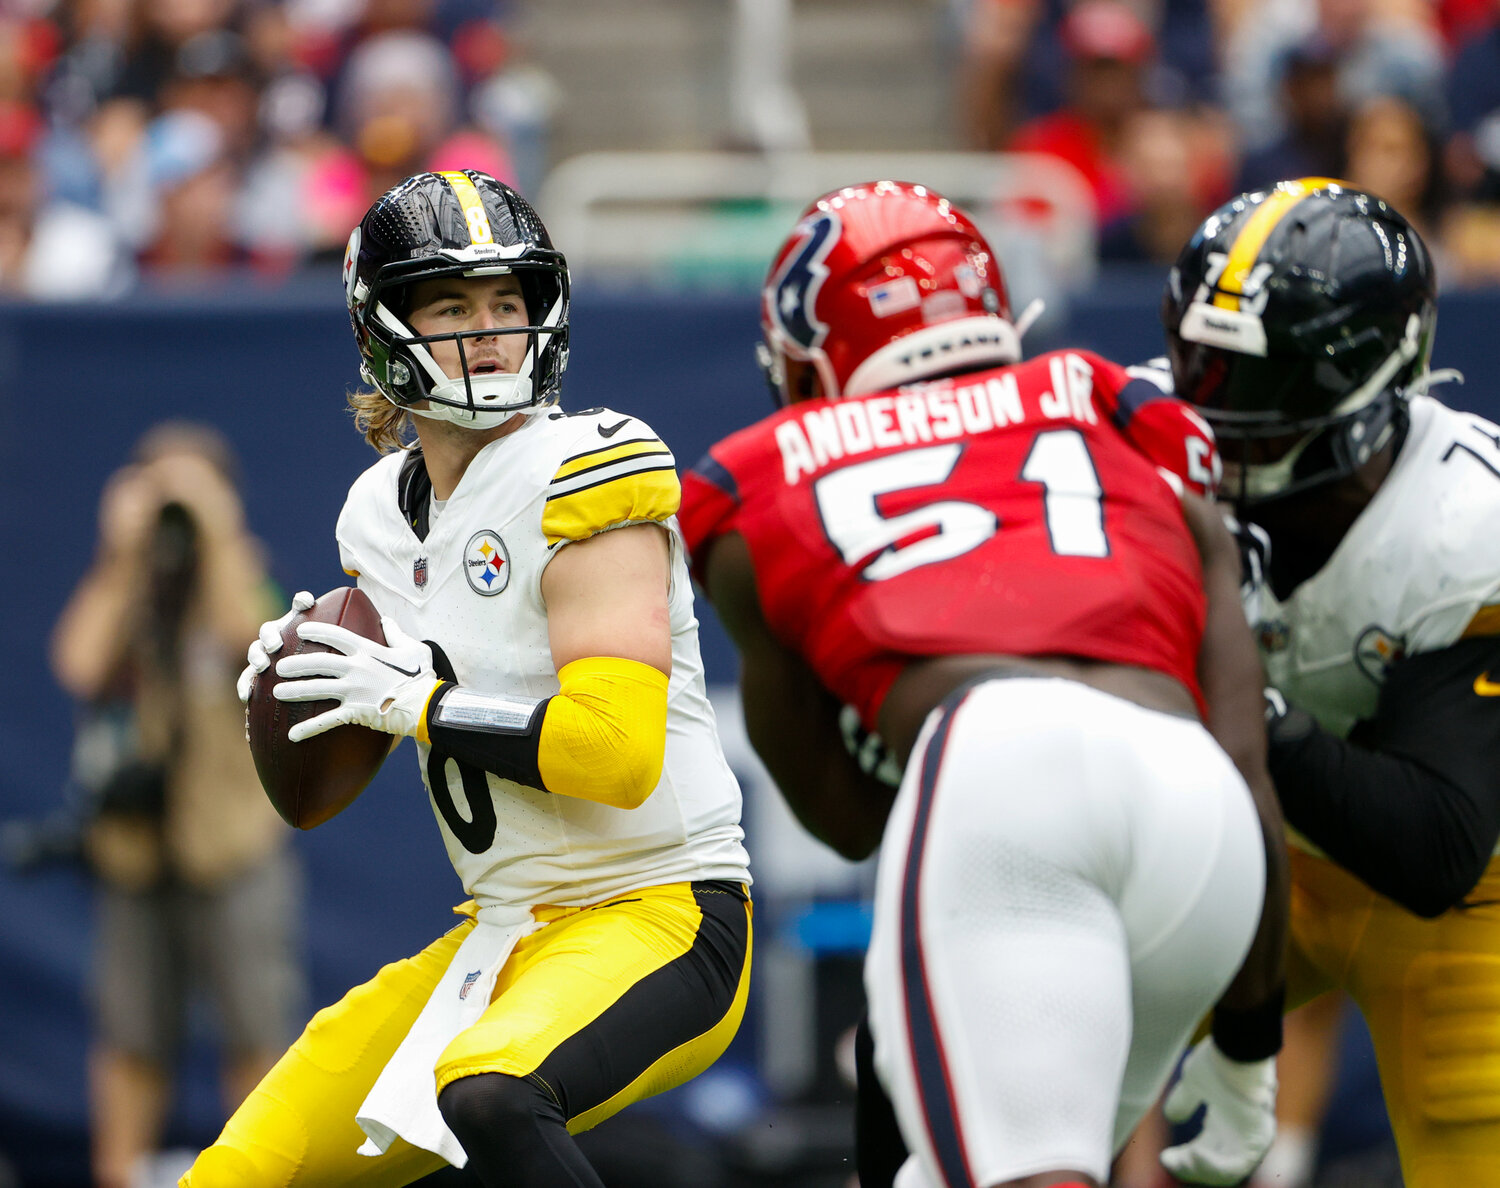 Steelers quarterback Kenny Pickett (8) looks to pass as offensive tackle Chukwuma Okorafor (76) blocks Texans defensive end Will Anderson Jr. (51) during an NFL game between the Texans and the Steelers on October 1, 2023 in Houston.